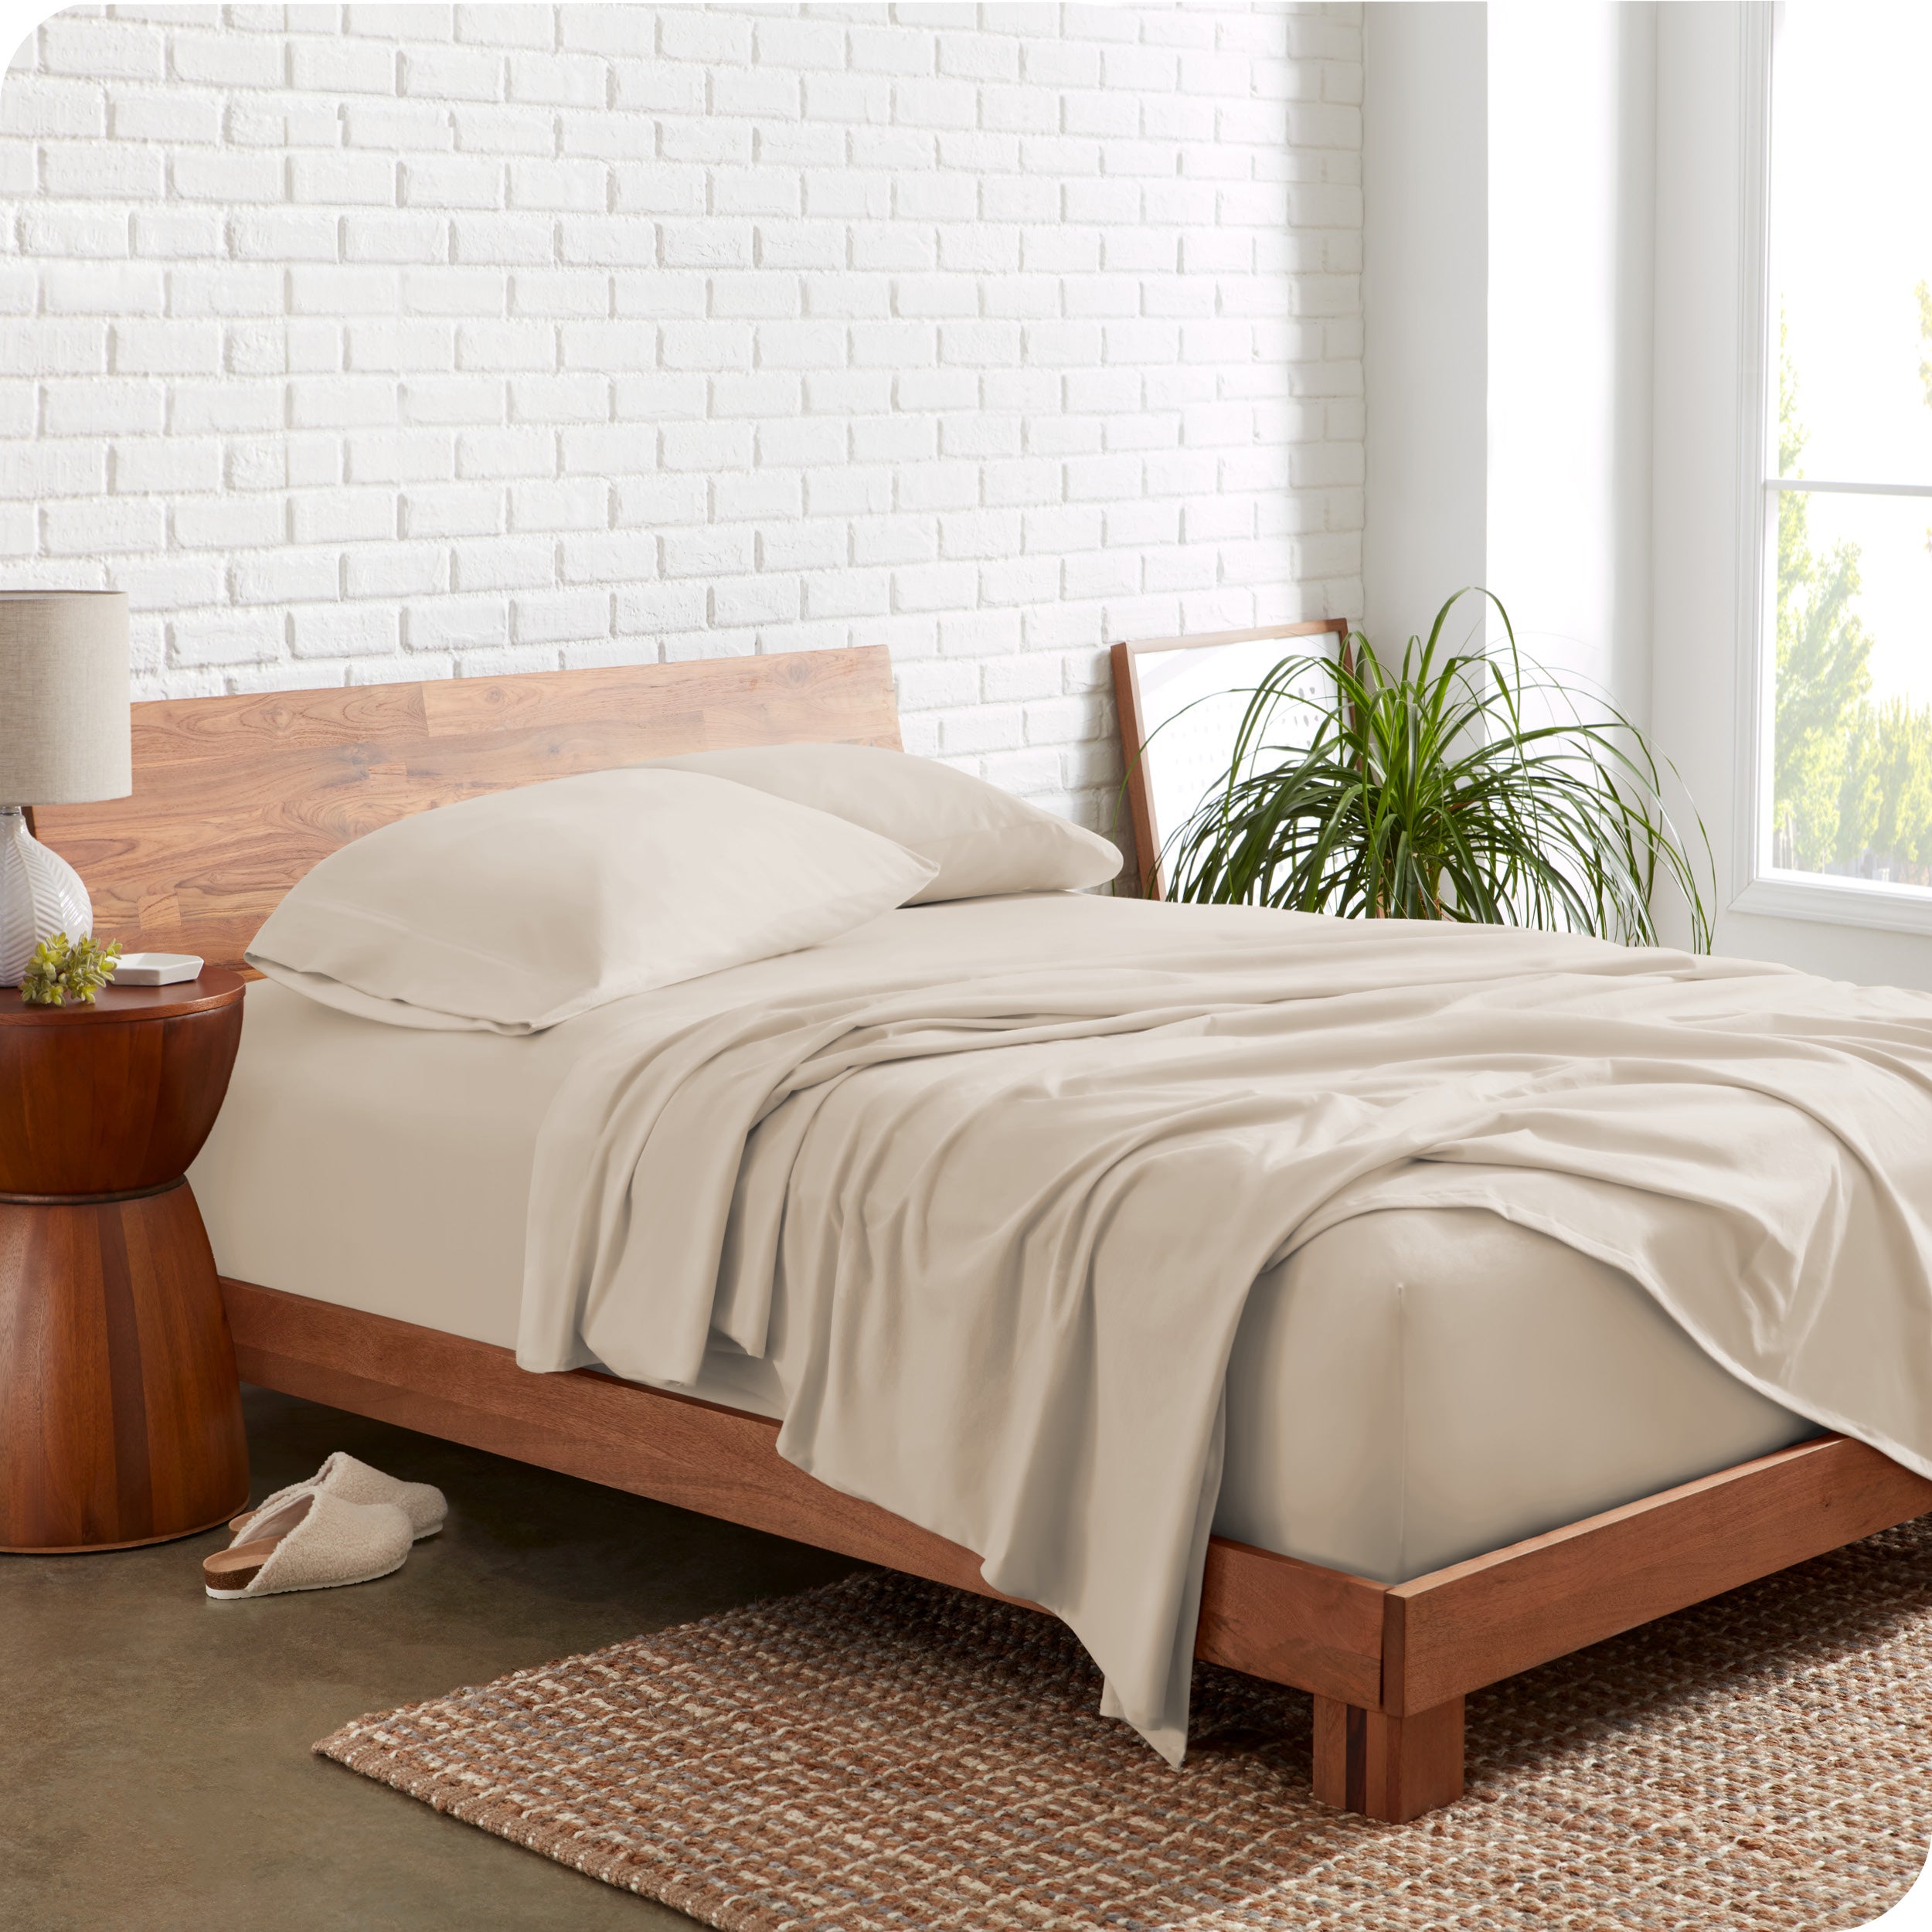 A modern bedroom with sand organic jersey sheets on the mattress